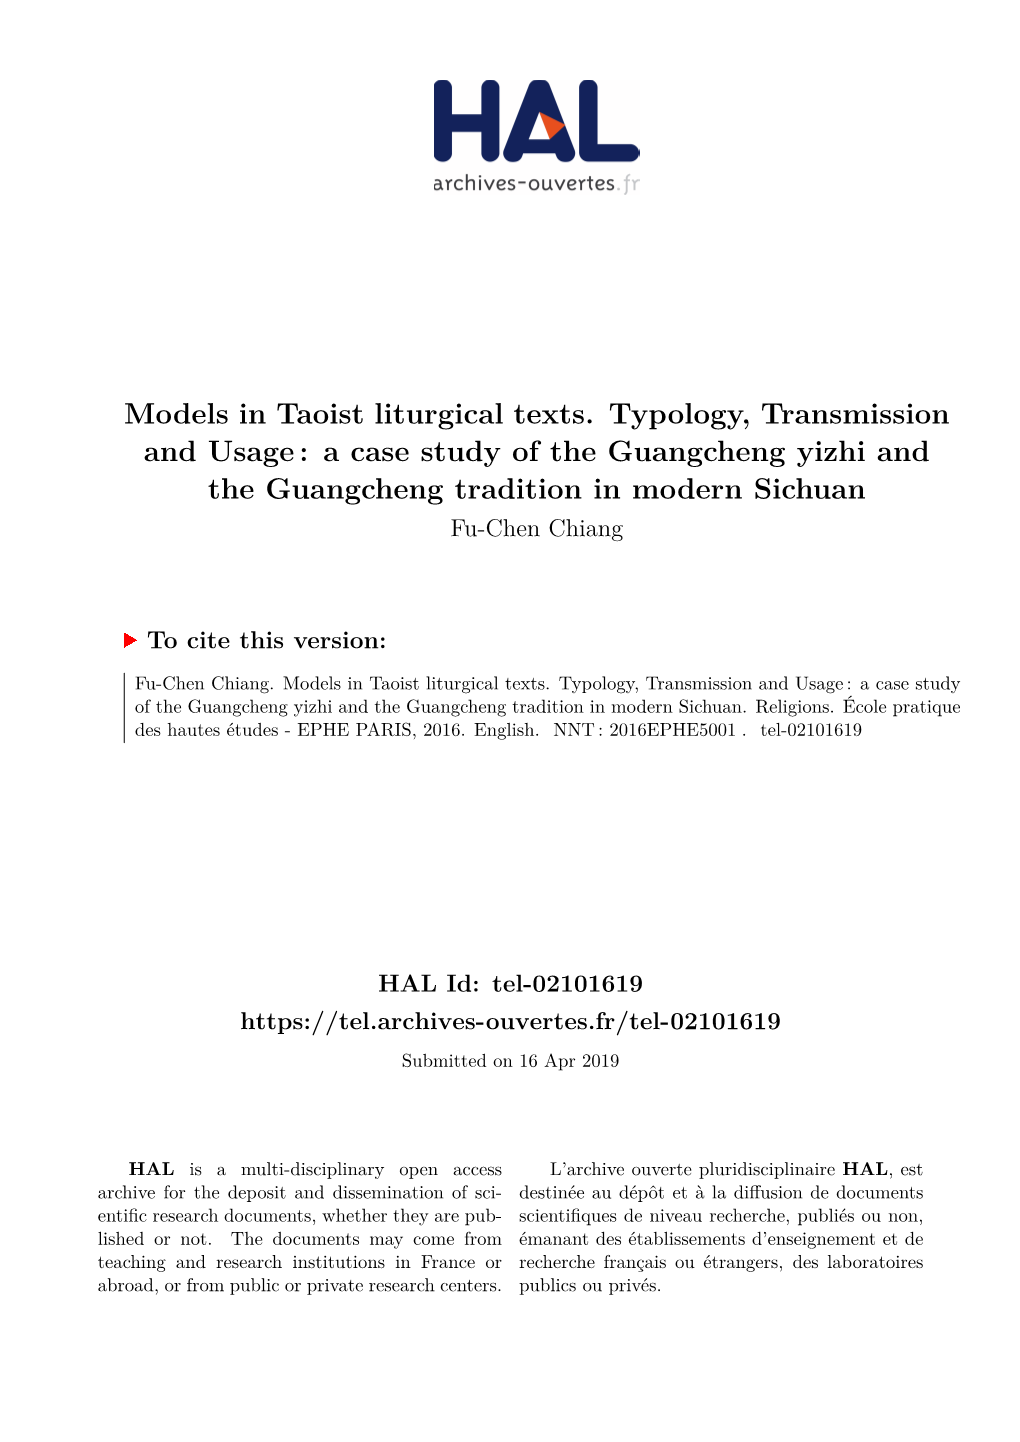 Models in Taoist Liturgical Texts. Typology, Transmission and Usage